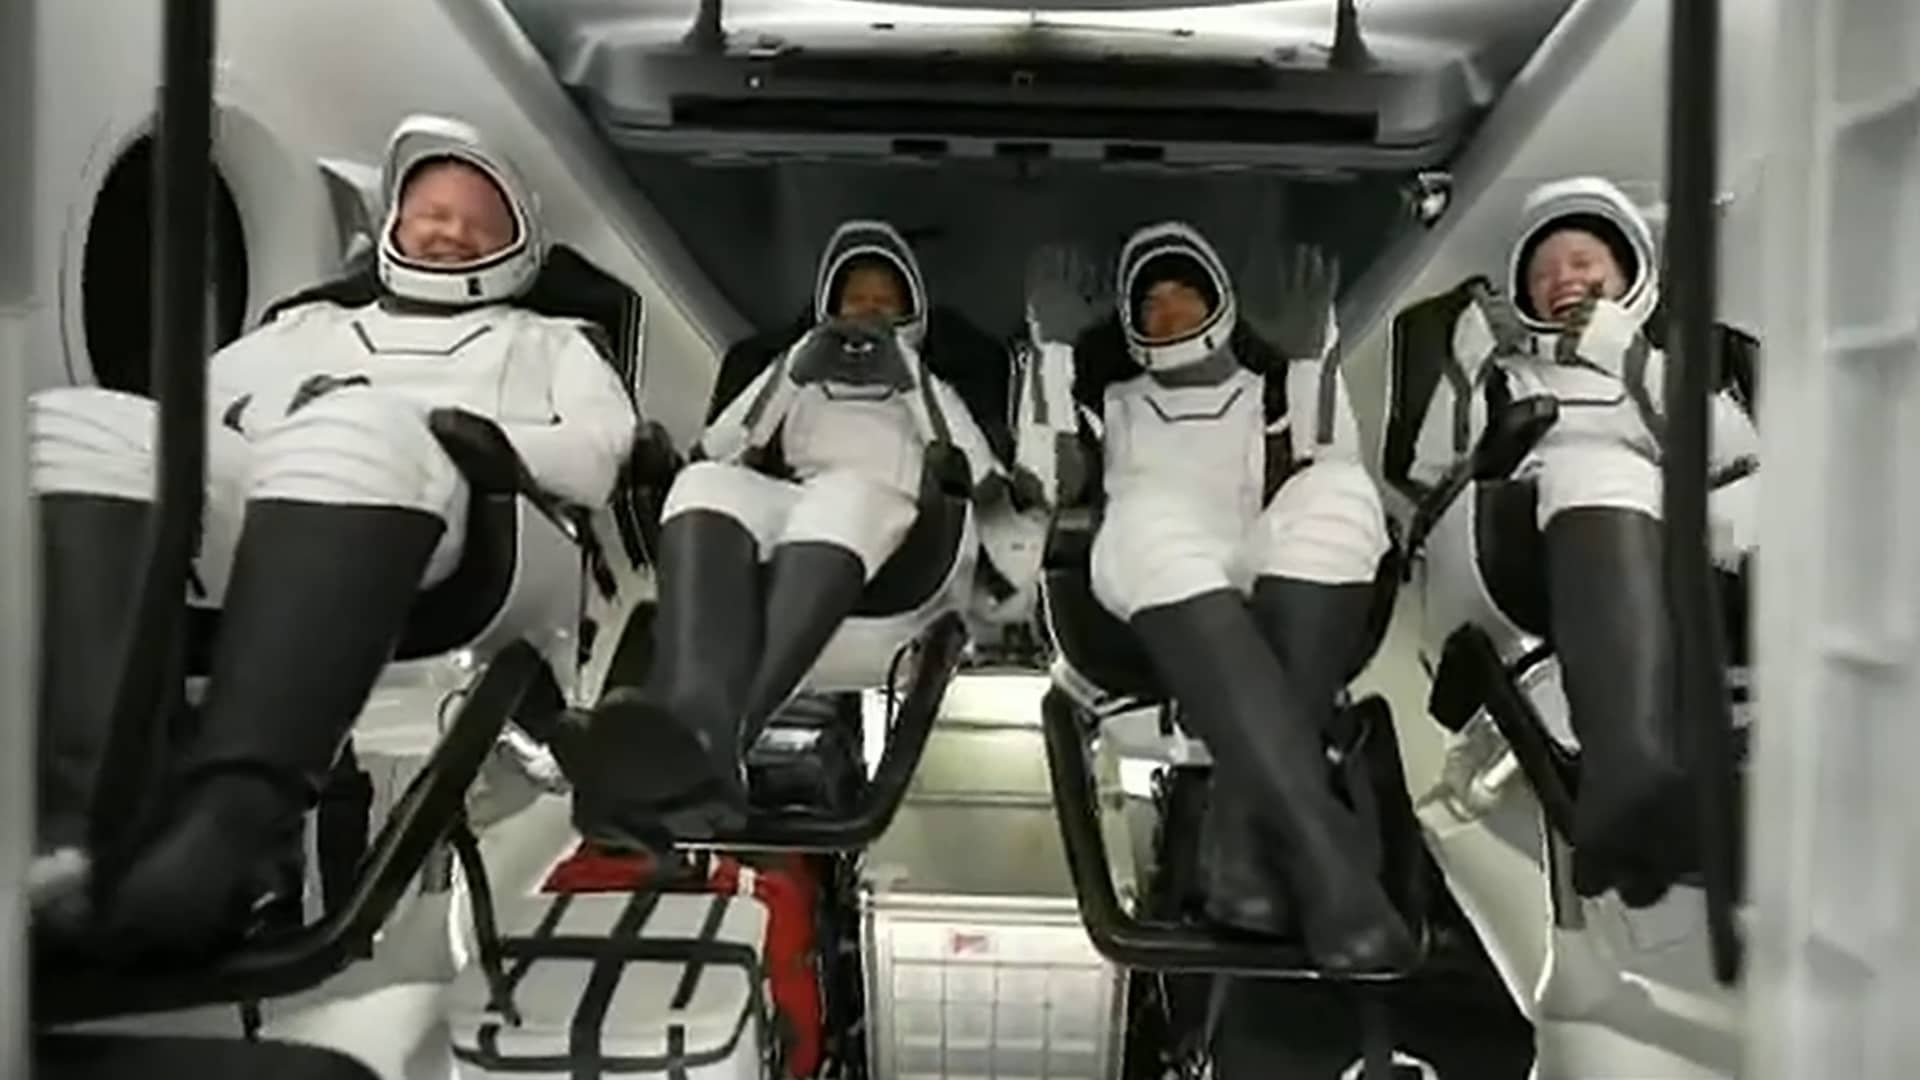 The Inspiration4 crew inside Crew Dragon capsule Resilience after the hatch was reopened. From left: Mission specialist Chris Sembroski, pilot Sian Proctor, commander Jared Isaacman, and medical officer Hayley Arceneaux.